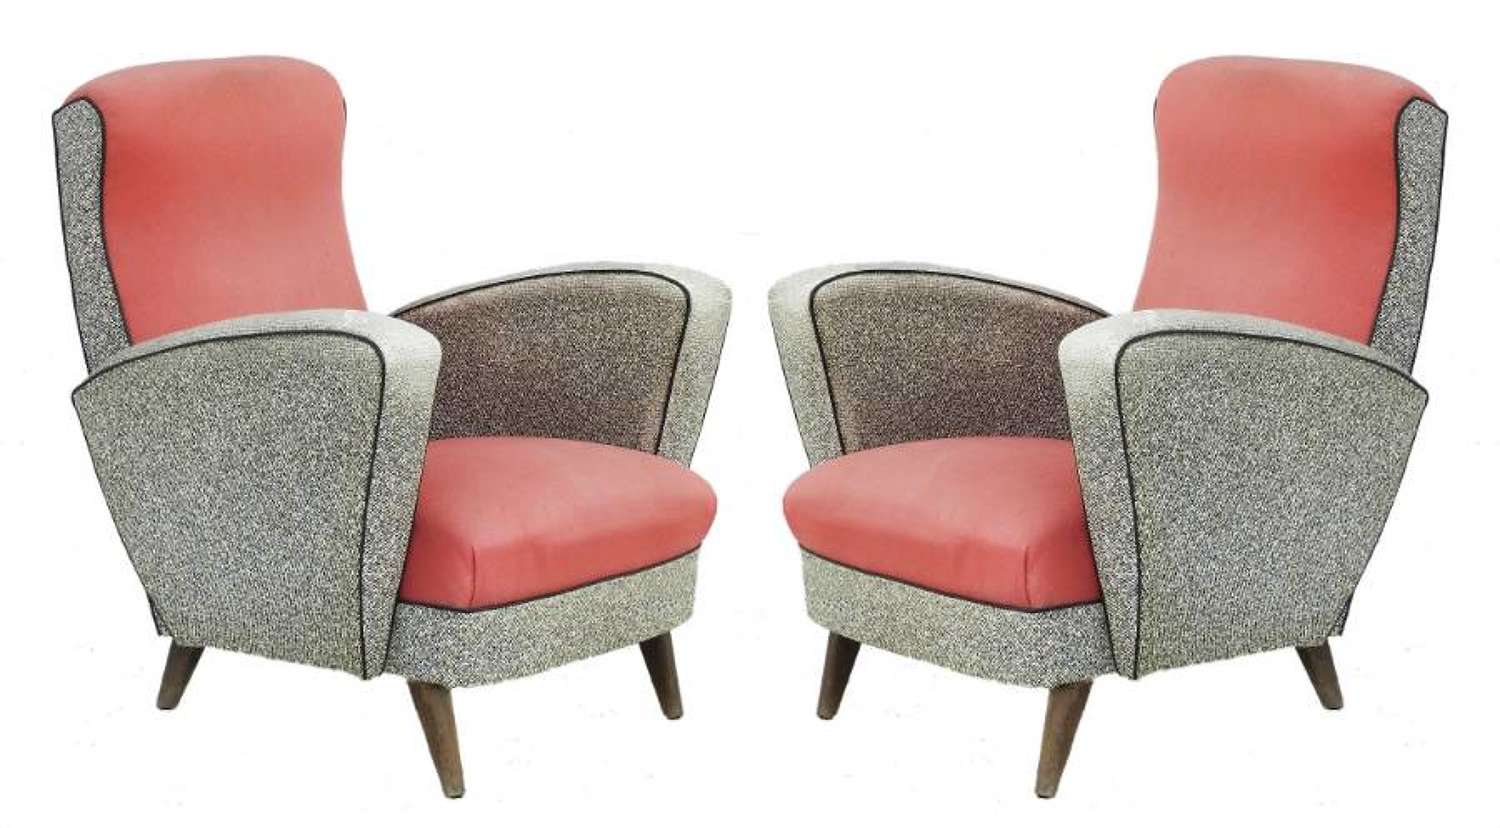 Pair Mid Century Lounge Chairs Original Condition French Armchairs